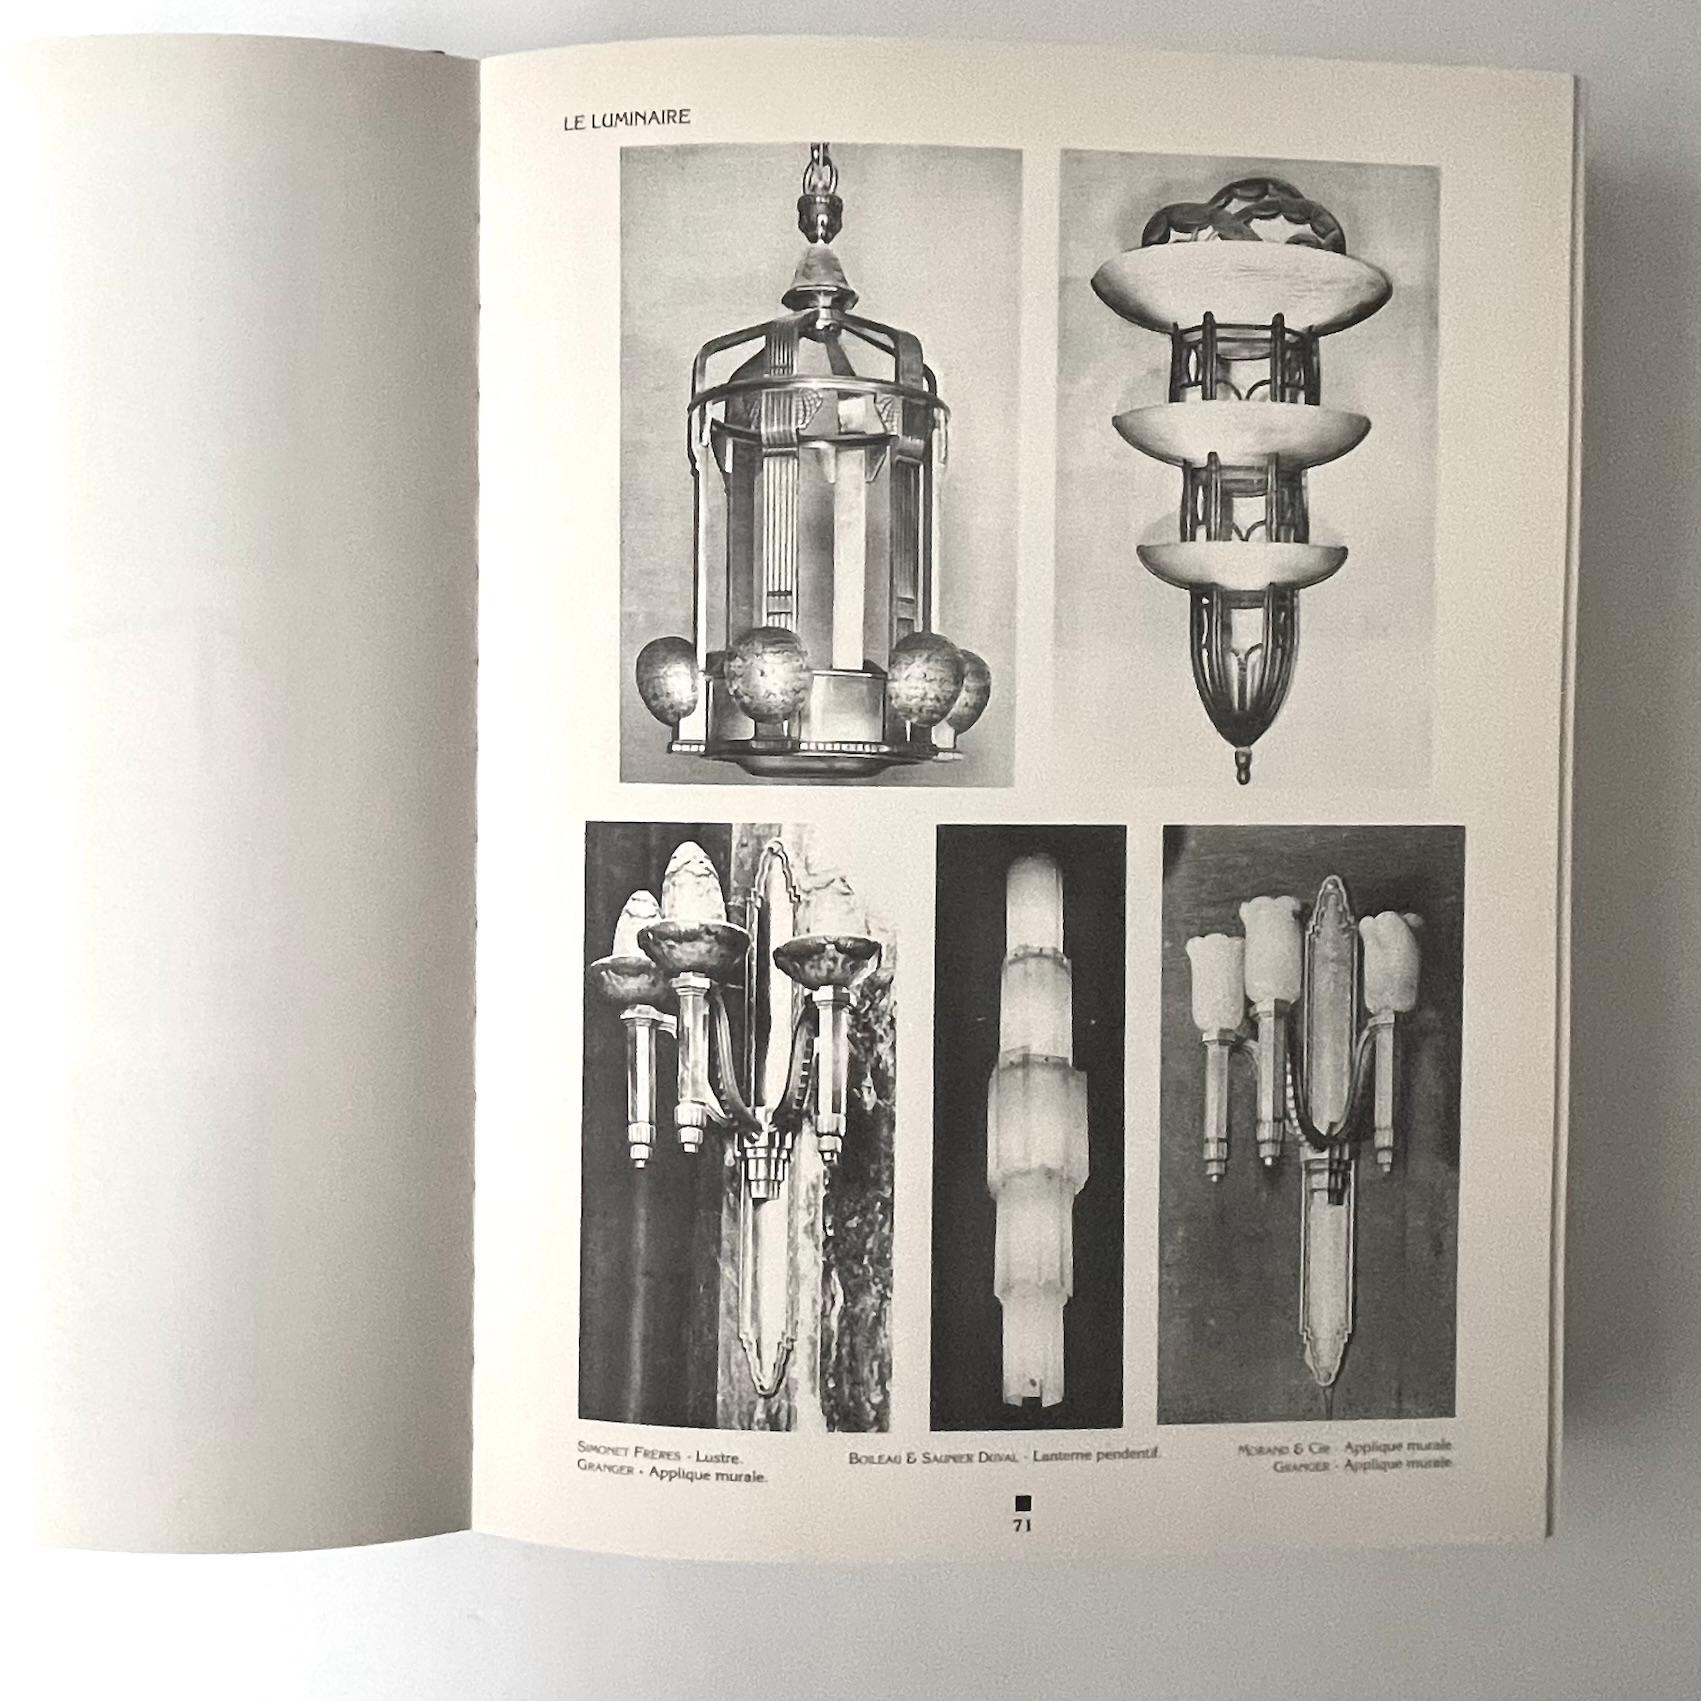 Published by Charles Moreau 1st Edition 1992

Le Luminaire Lighting Design 1925-1937, reproduced are 4 books presenting 144 artists and 500 workshops shown at the Paris International Exhibitions from 1925 to 1937.. An important lighting reference